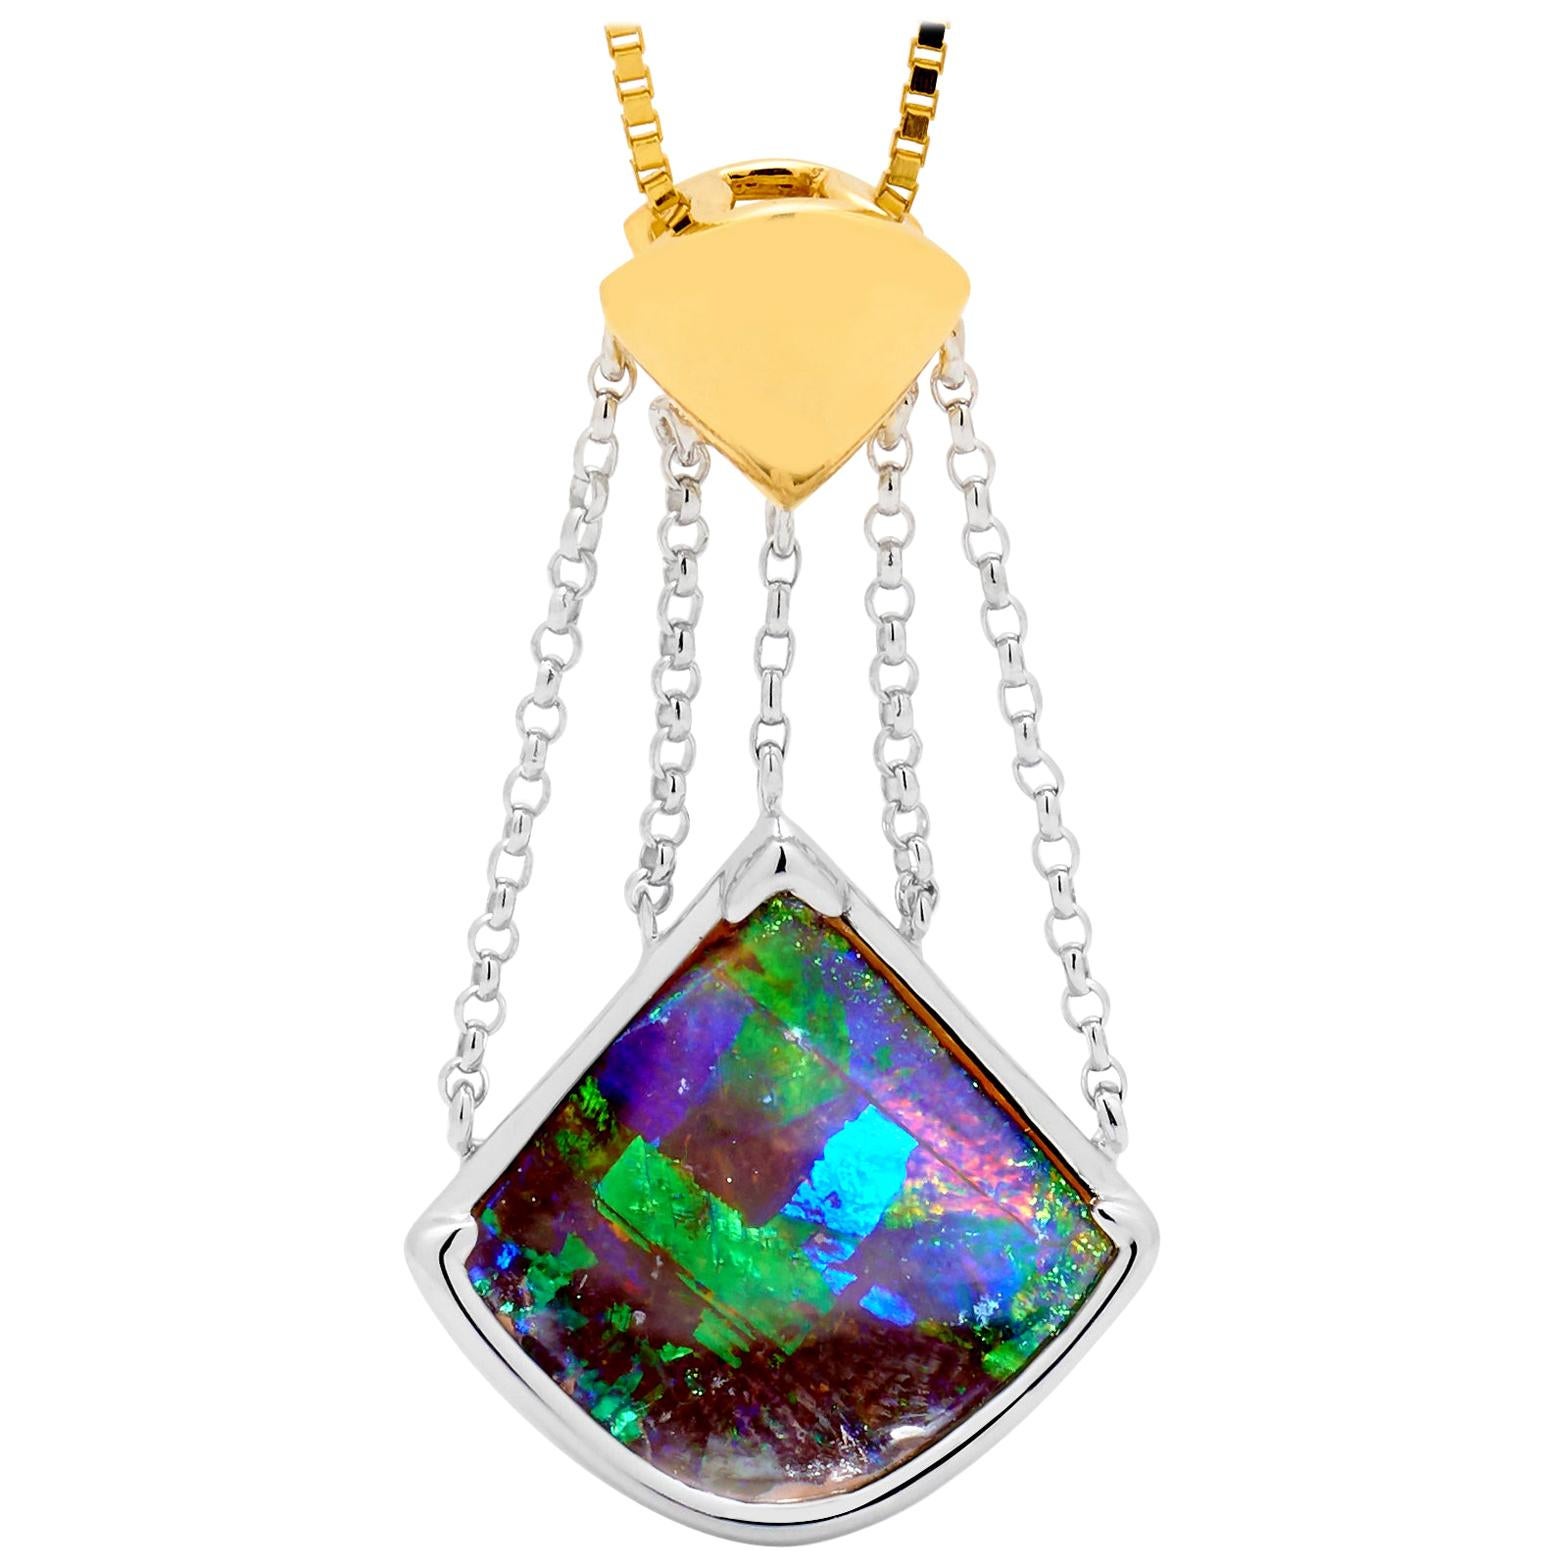 Australian 3.89ct Boulder Opal Pendant in 18K White and Yellow Gold